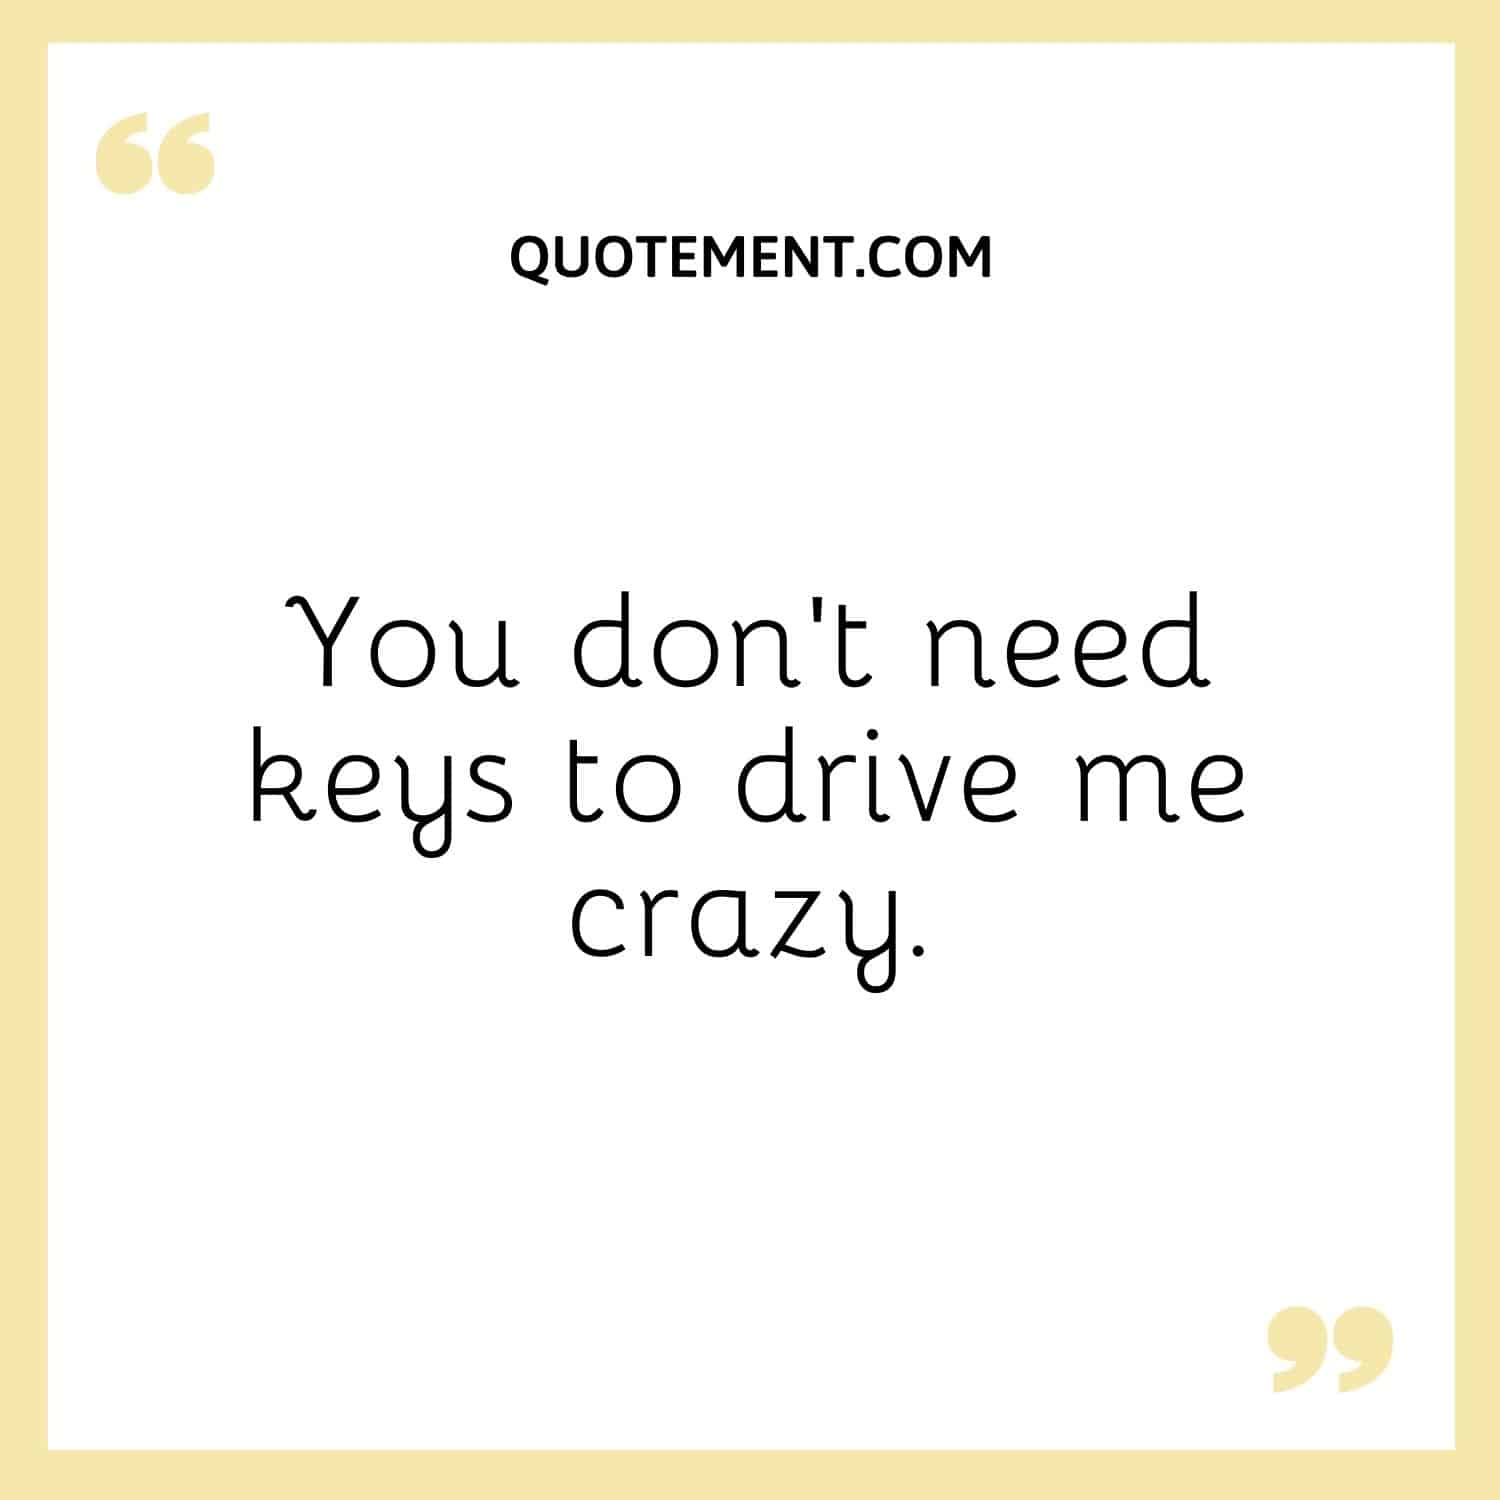 You don’t need keys to drive me crazy